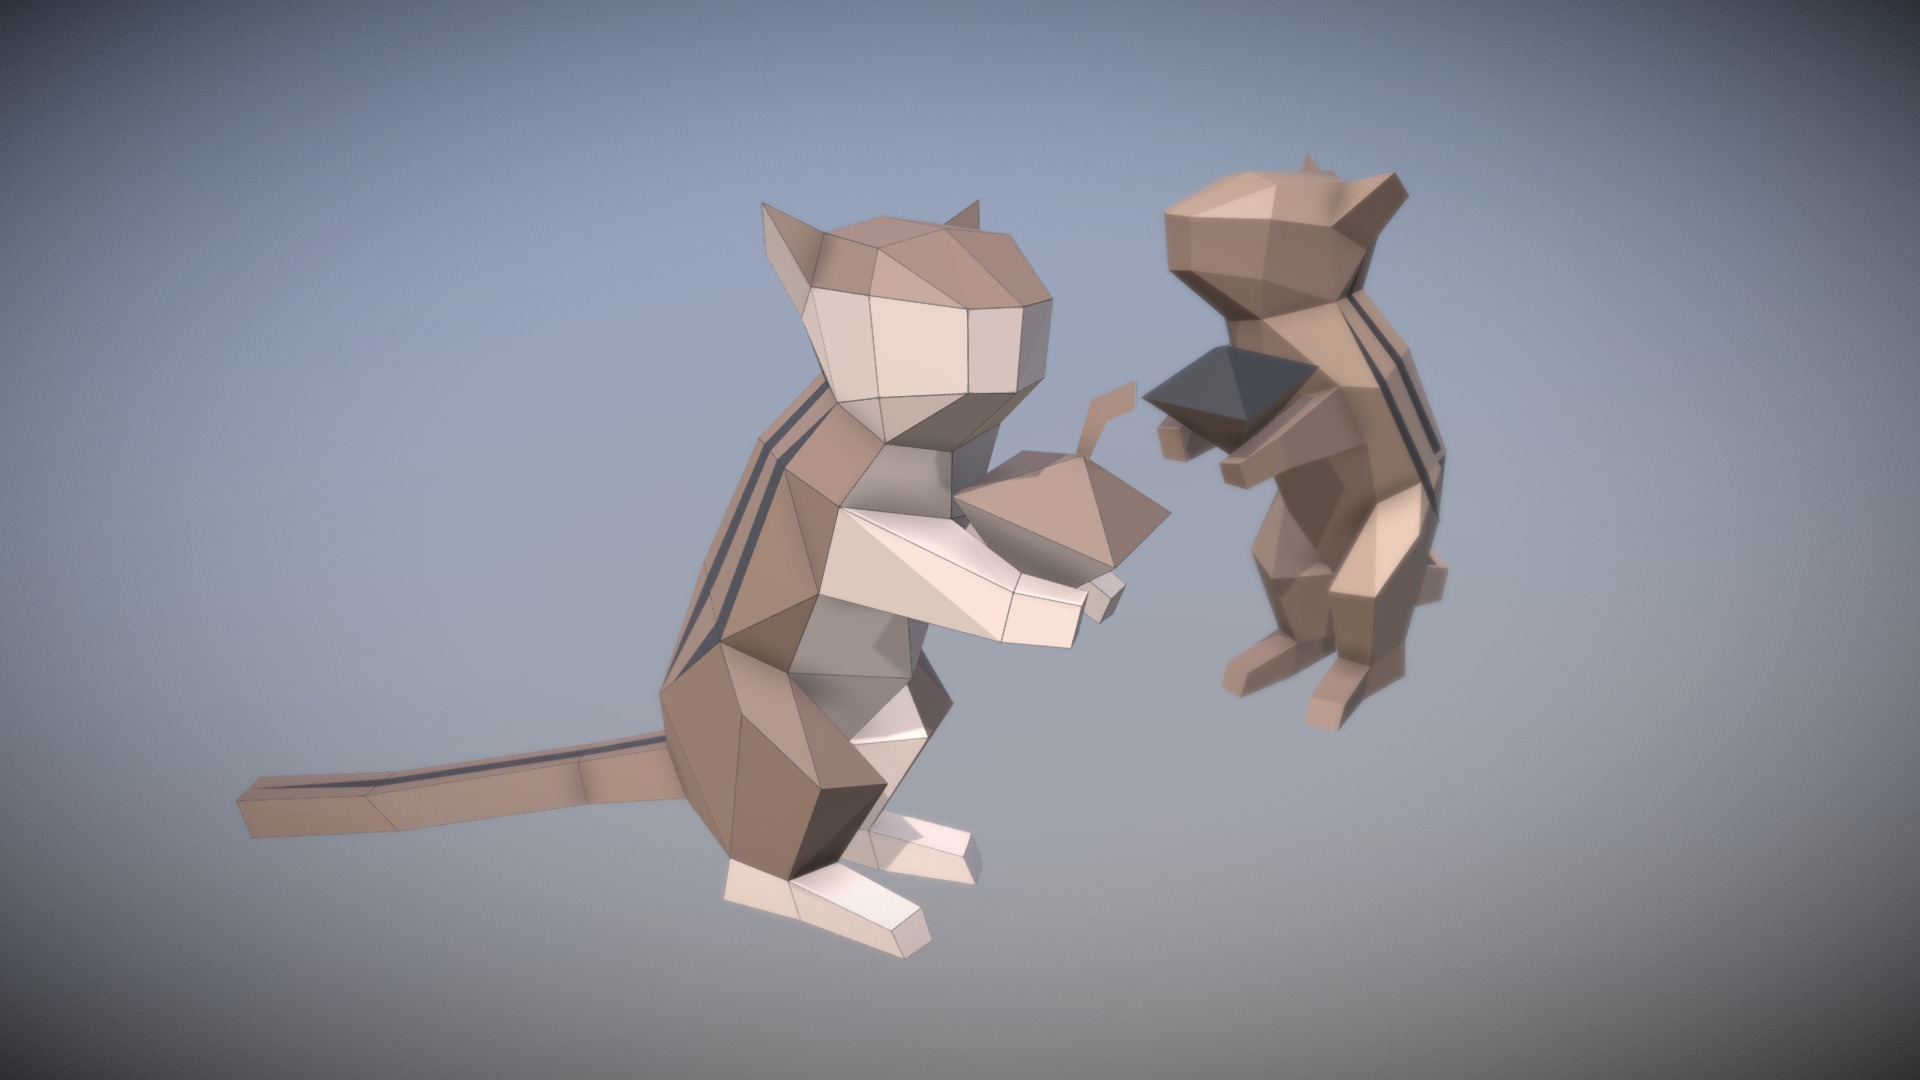 3D model Chipmunk lowpoly - This is a 3D model of the Chipmunk lowpoly. The 3D model is about a group of white objects.